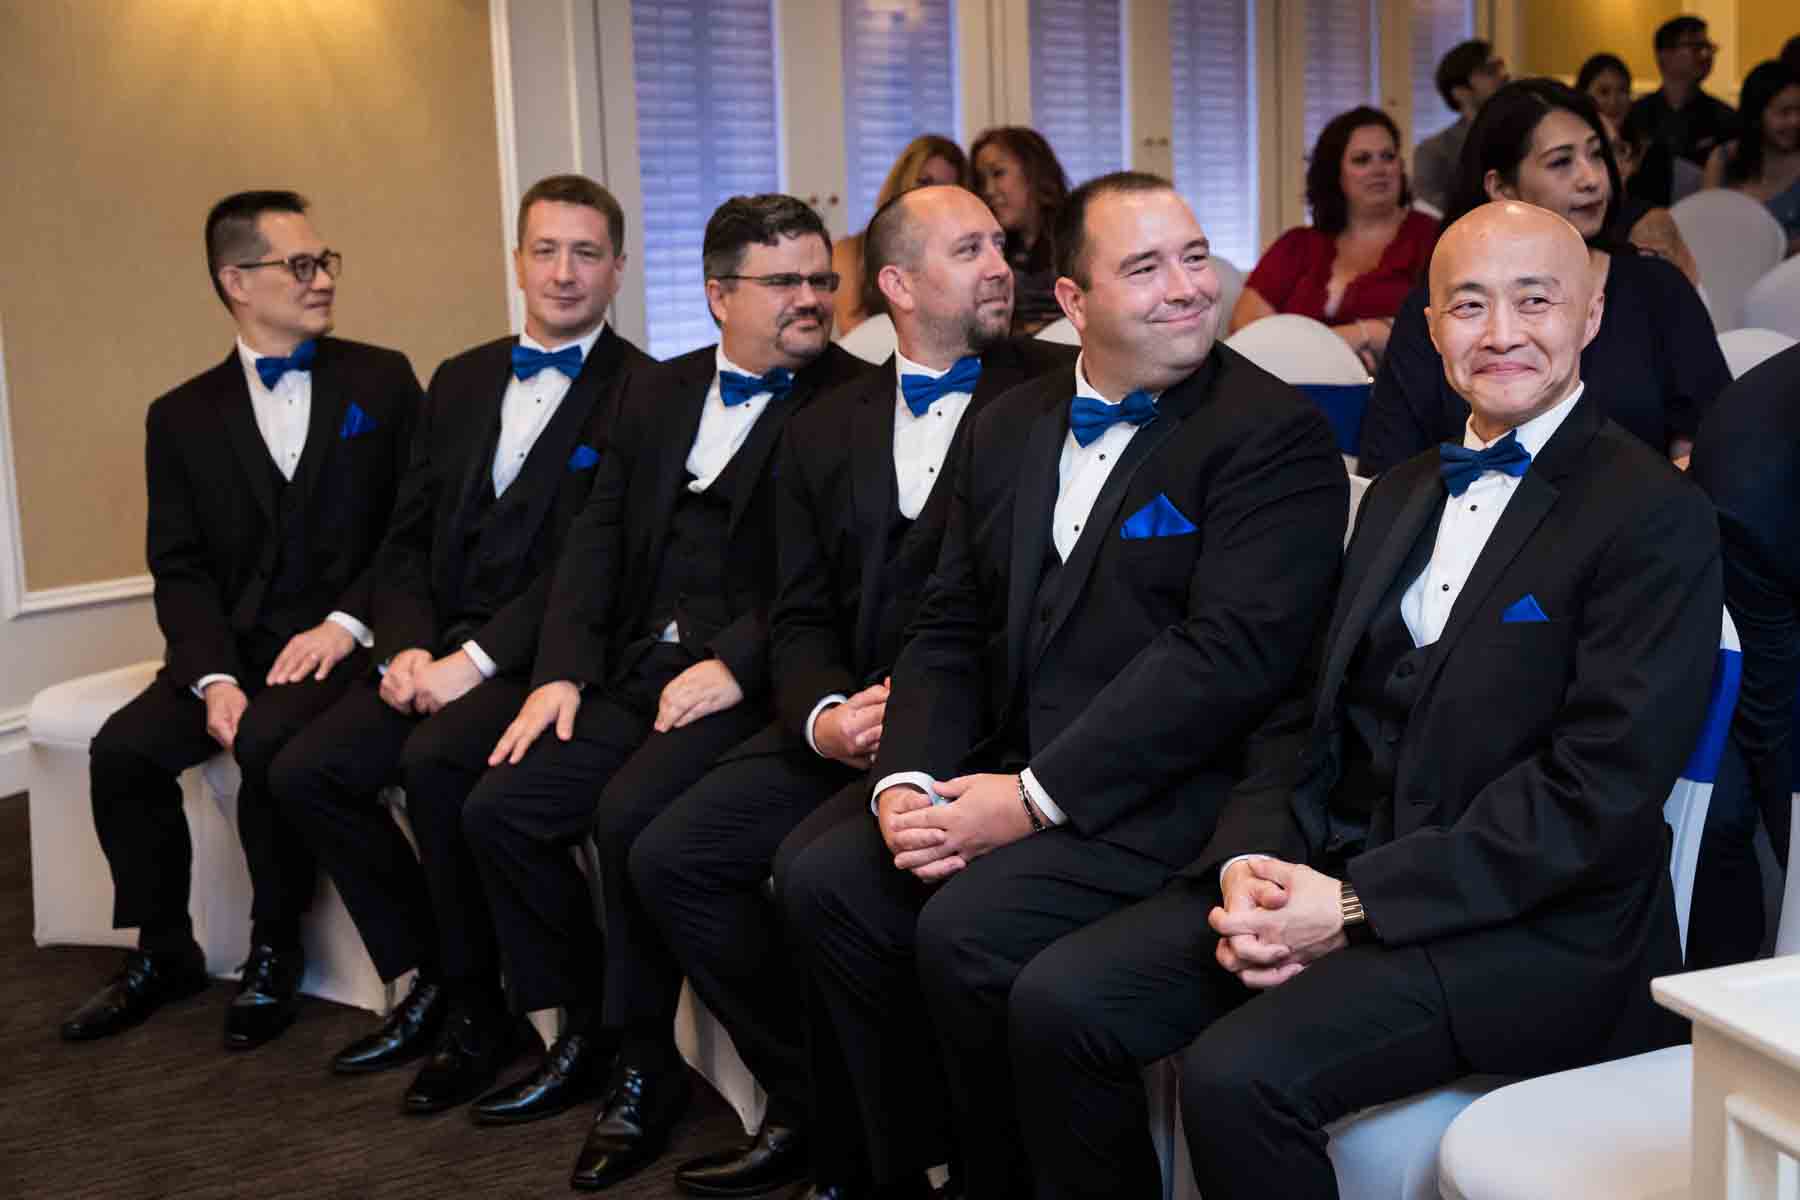 Groomsmen sitting in front row during ceremony at a Terrace on the Park wedding